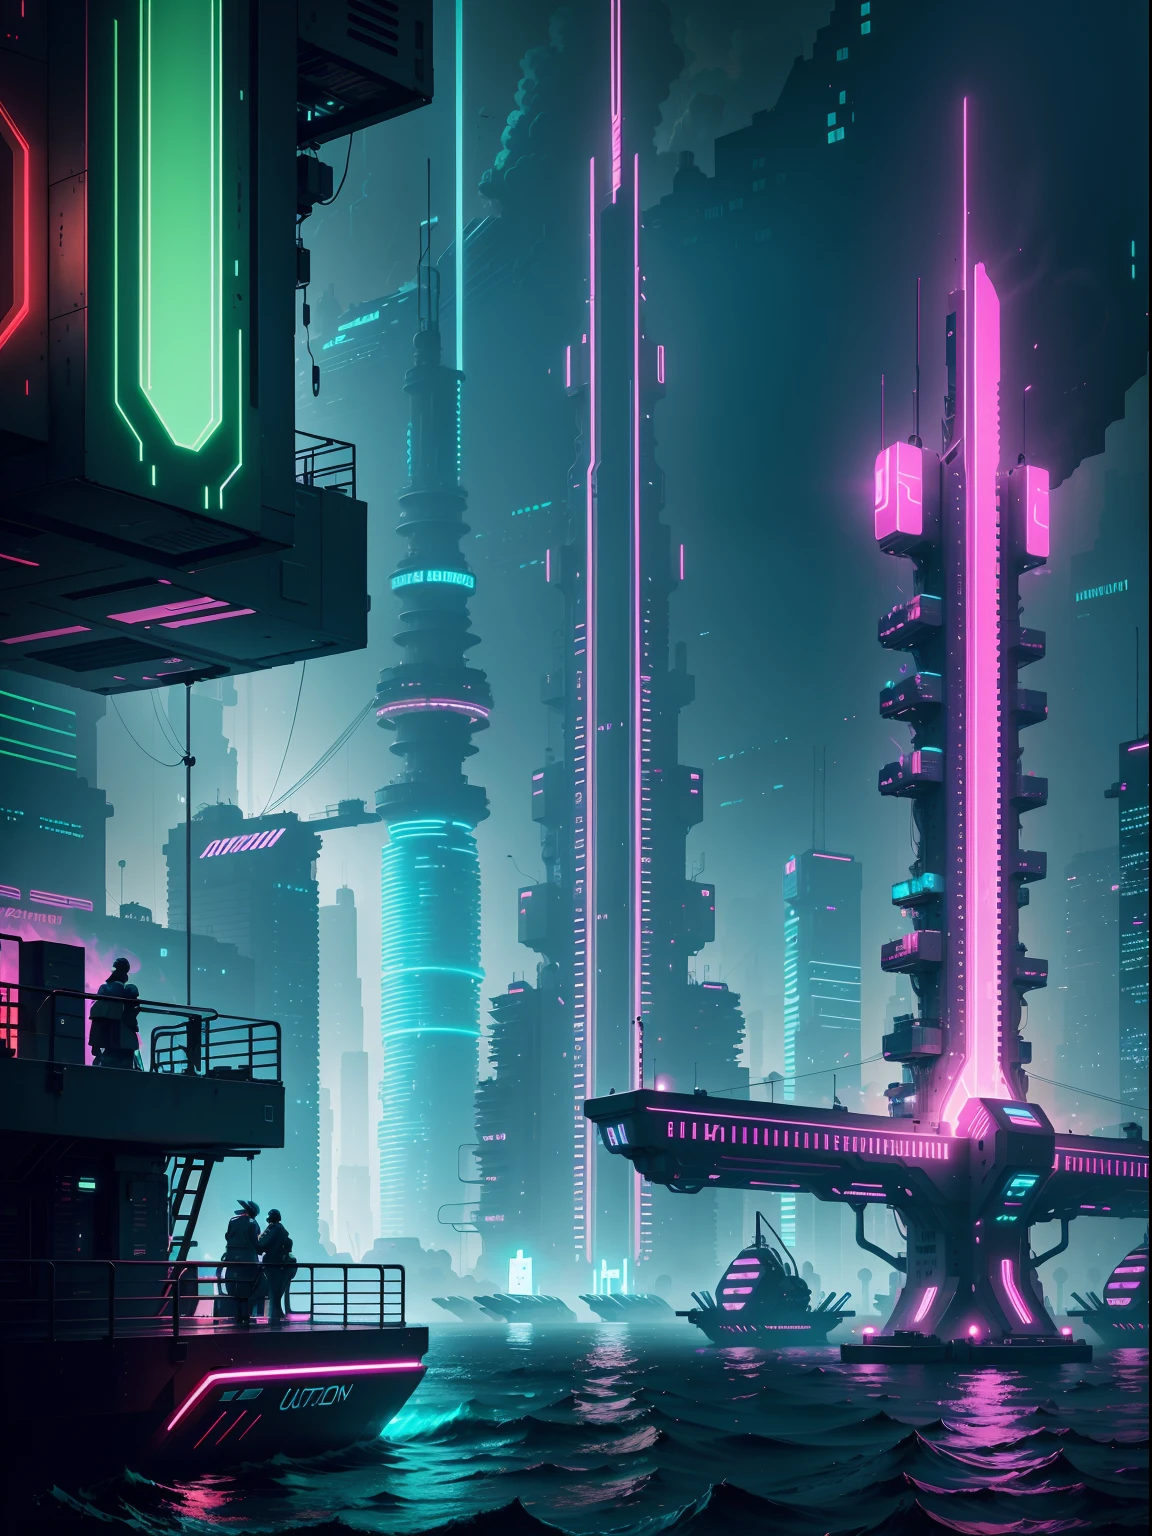 Cyberpunk Floating city, A neon city built on water, neon water effects, cyberpunk neon city on water 24K UHD display graphics, wide angle shot, red neon glowing and shining effects, green AI computer tower build on water, ocean, sea